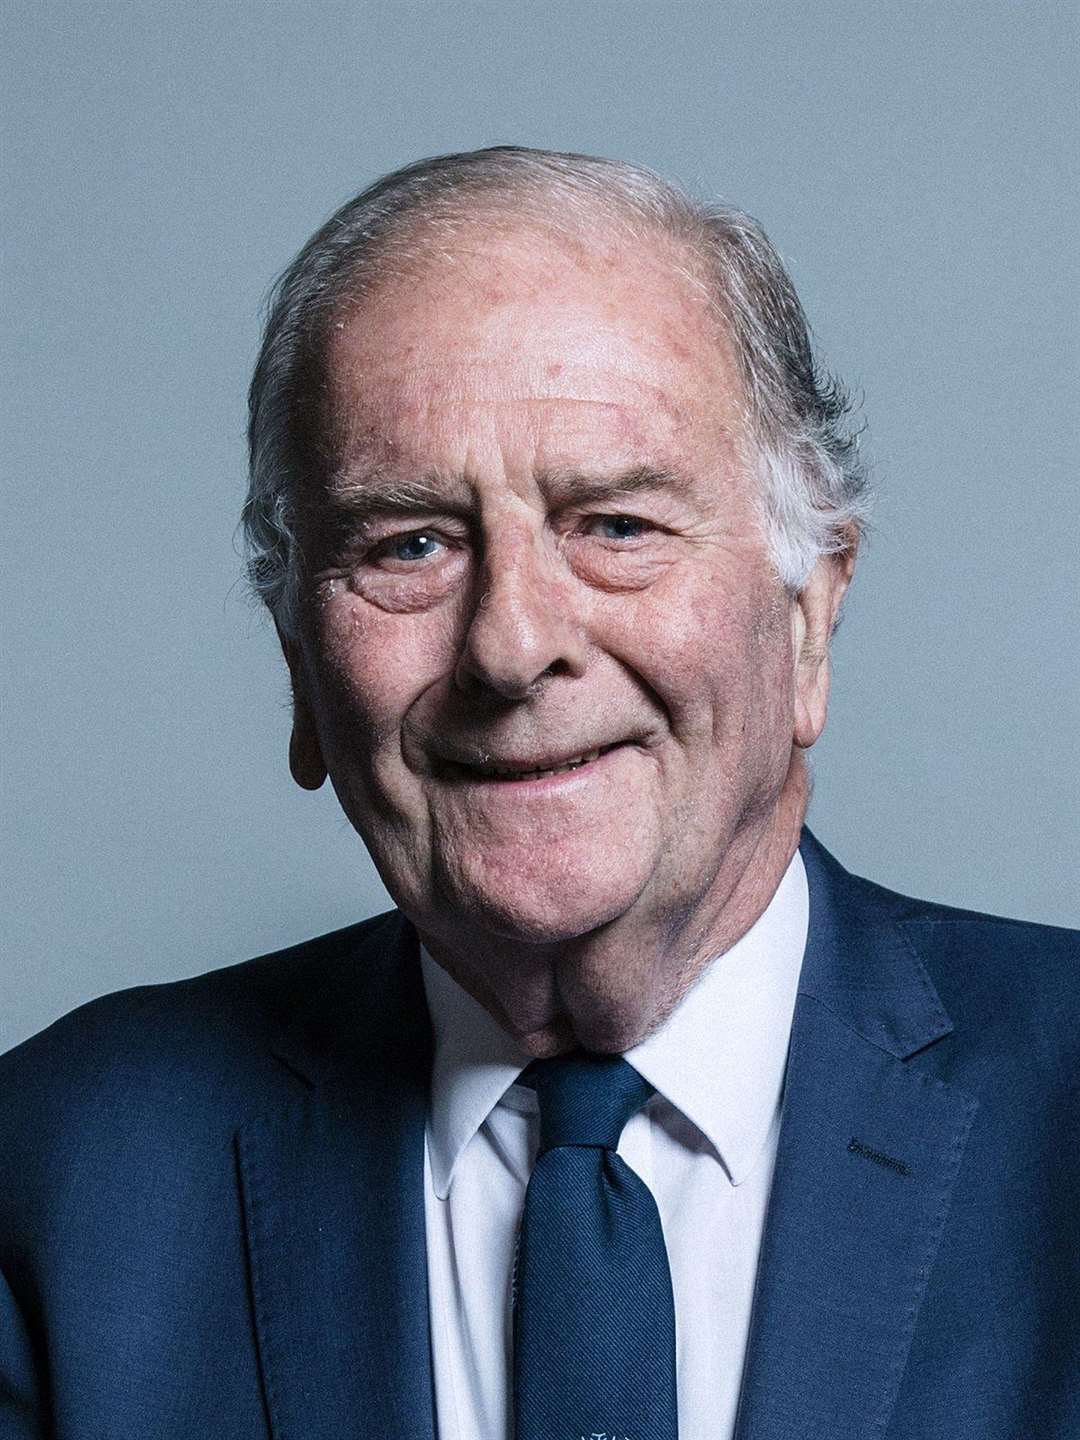 Sir Roger Gale MP for North Thanet